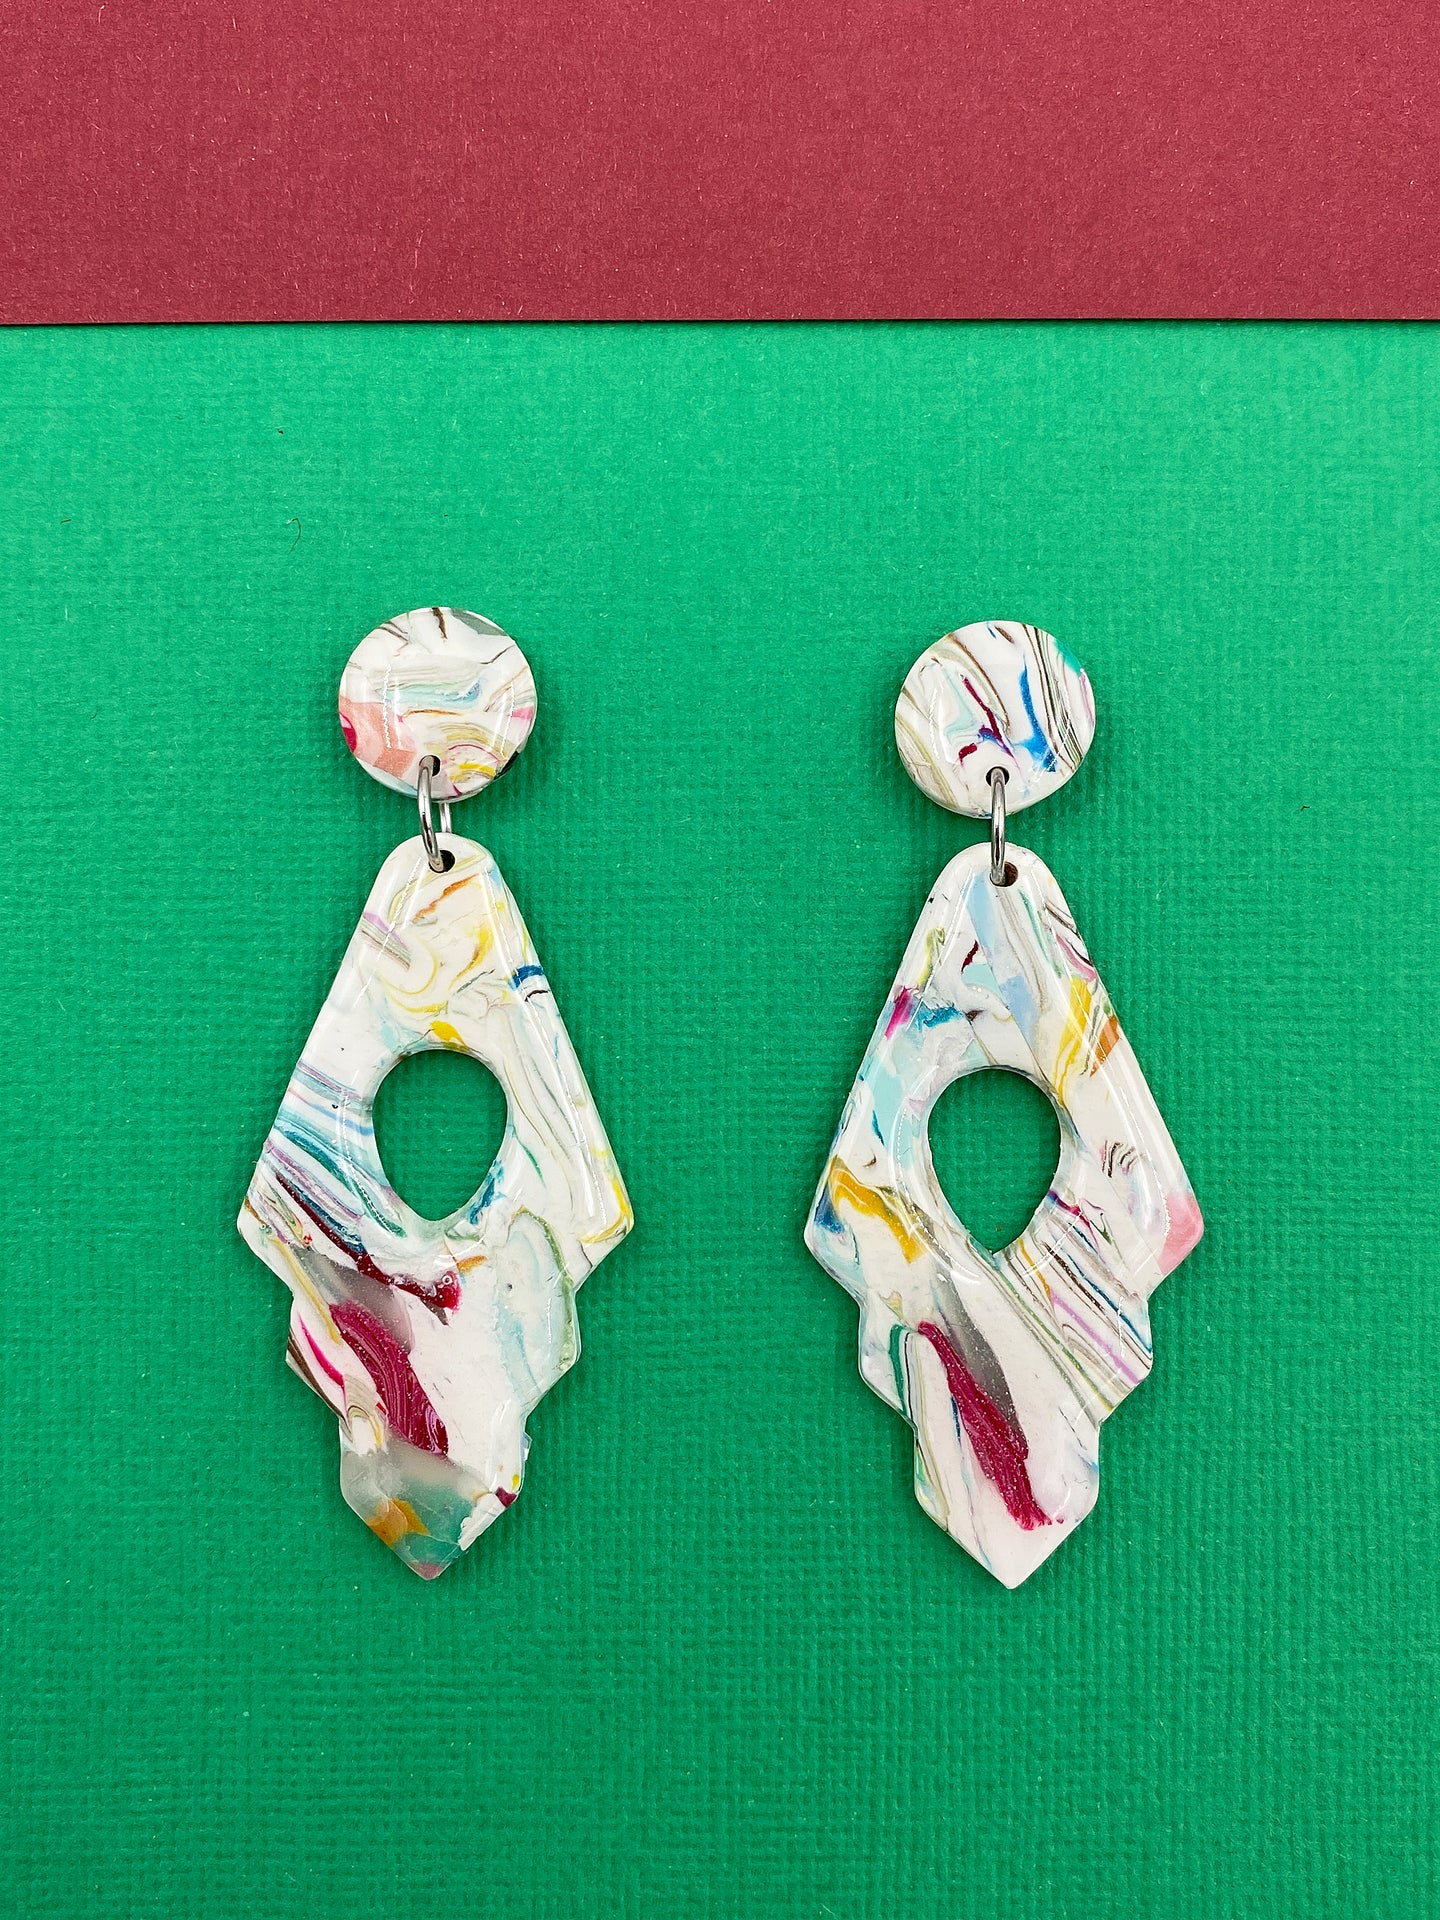 Light and Airy - Art Deco Statement Earrings